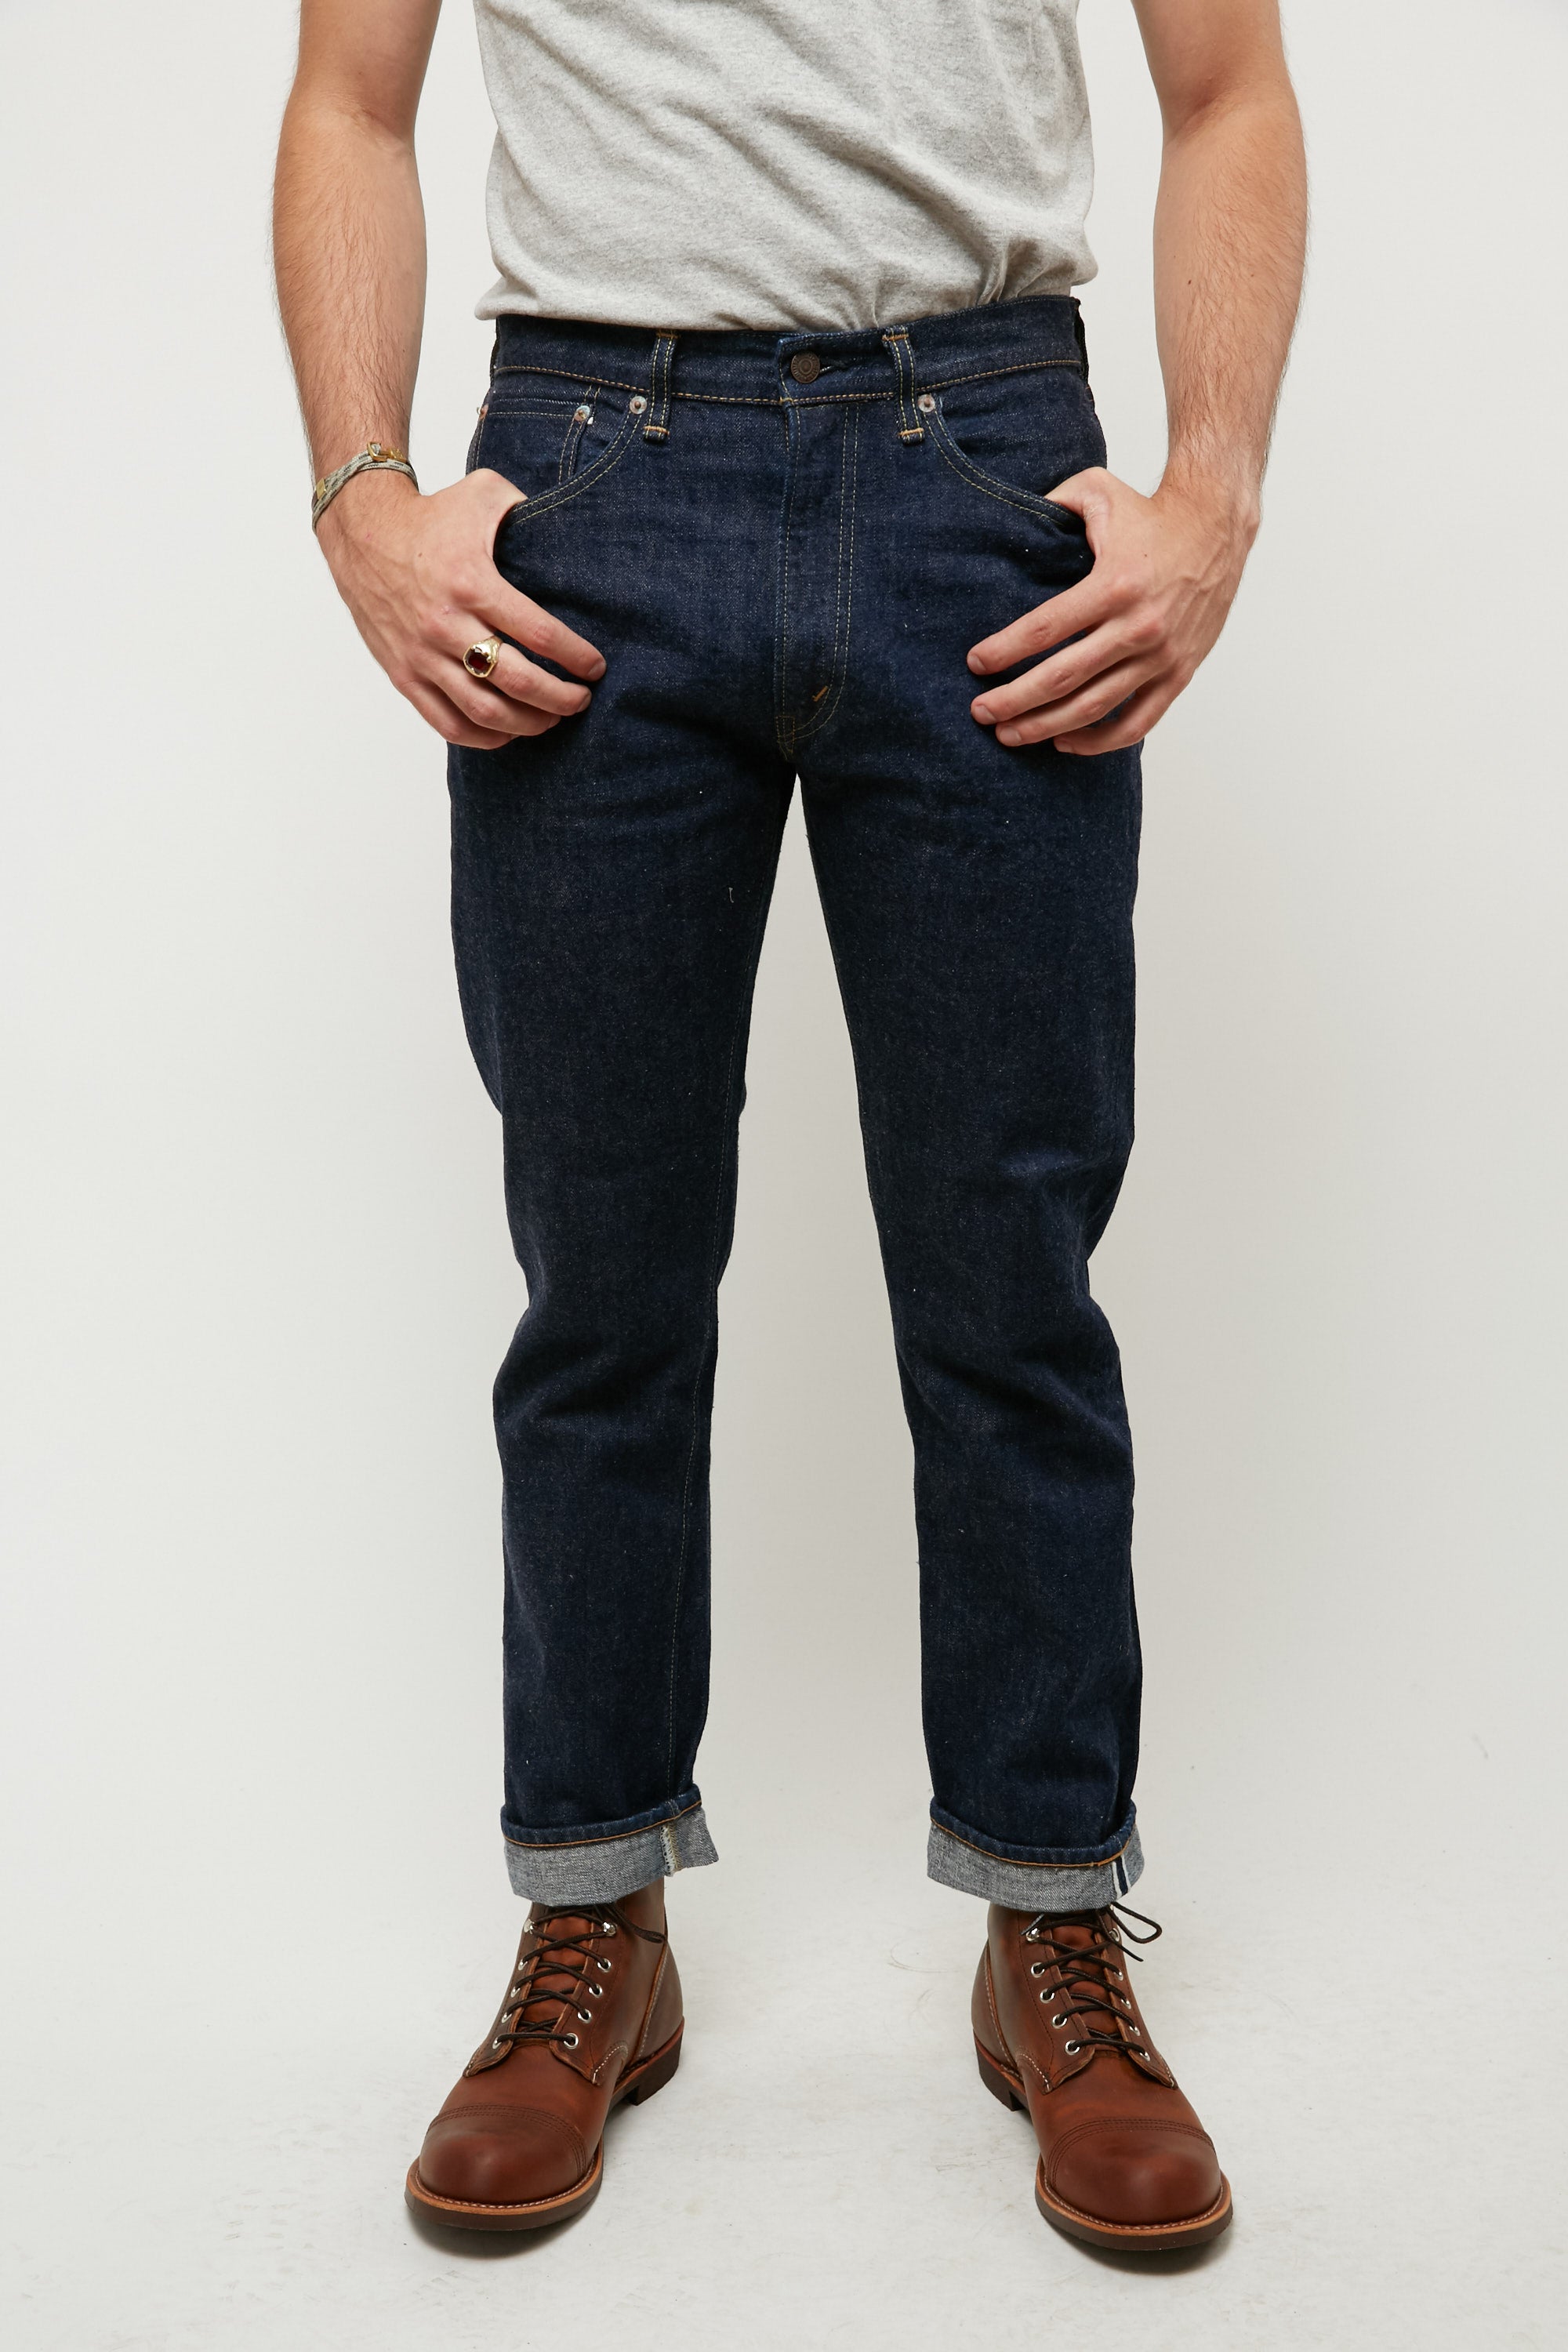 orSlow 107 Ivy Fit Slim Jean - One Wash - Totem Brand Co.